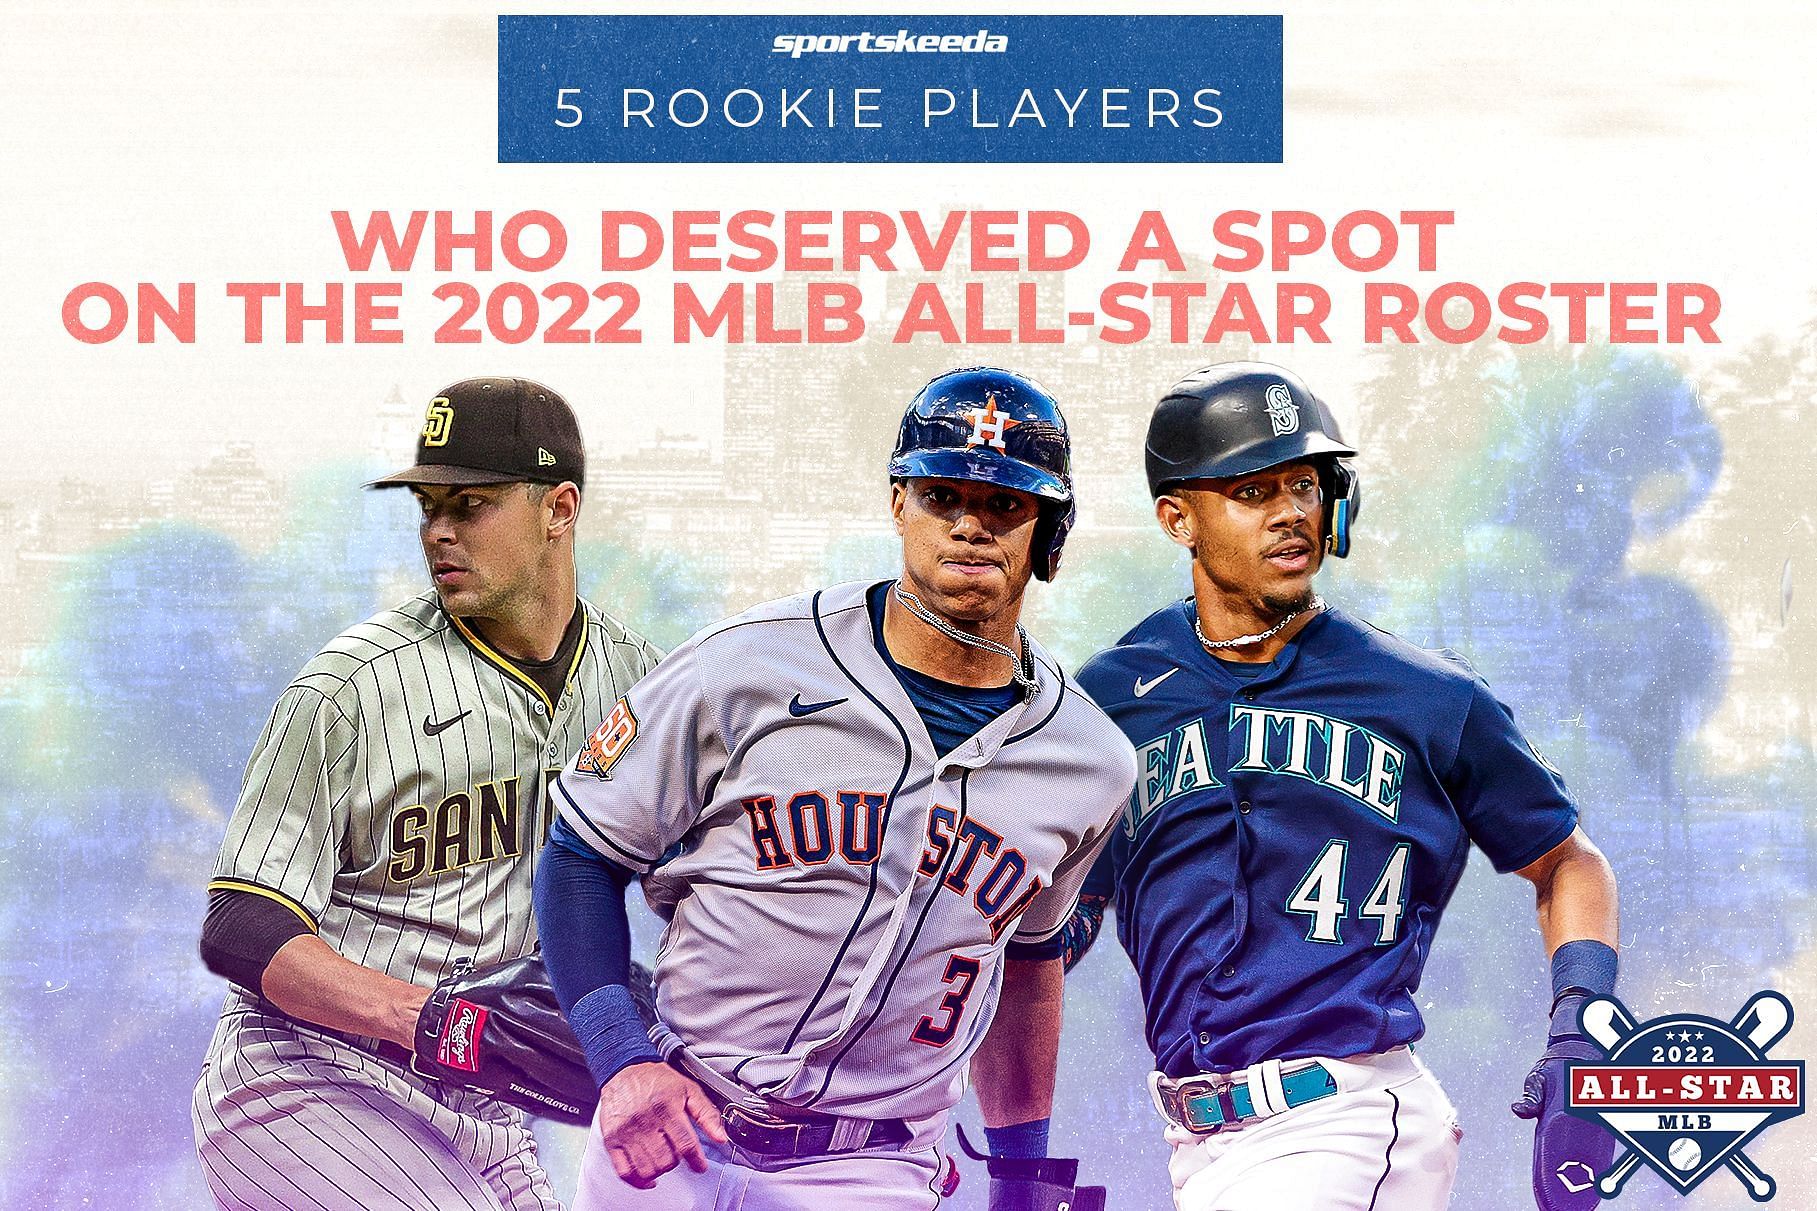 5 rookie players who deserve a spot on the 2022 MLB All-Star